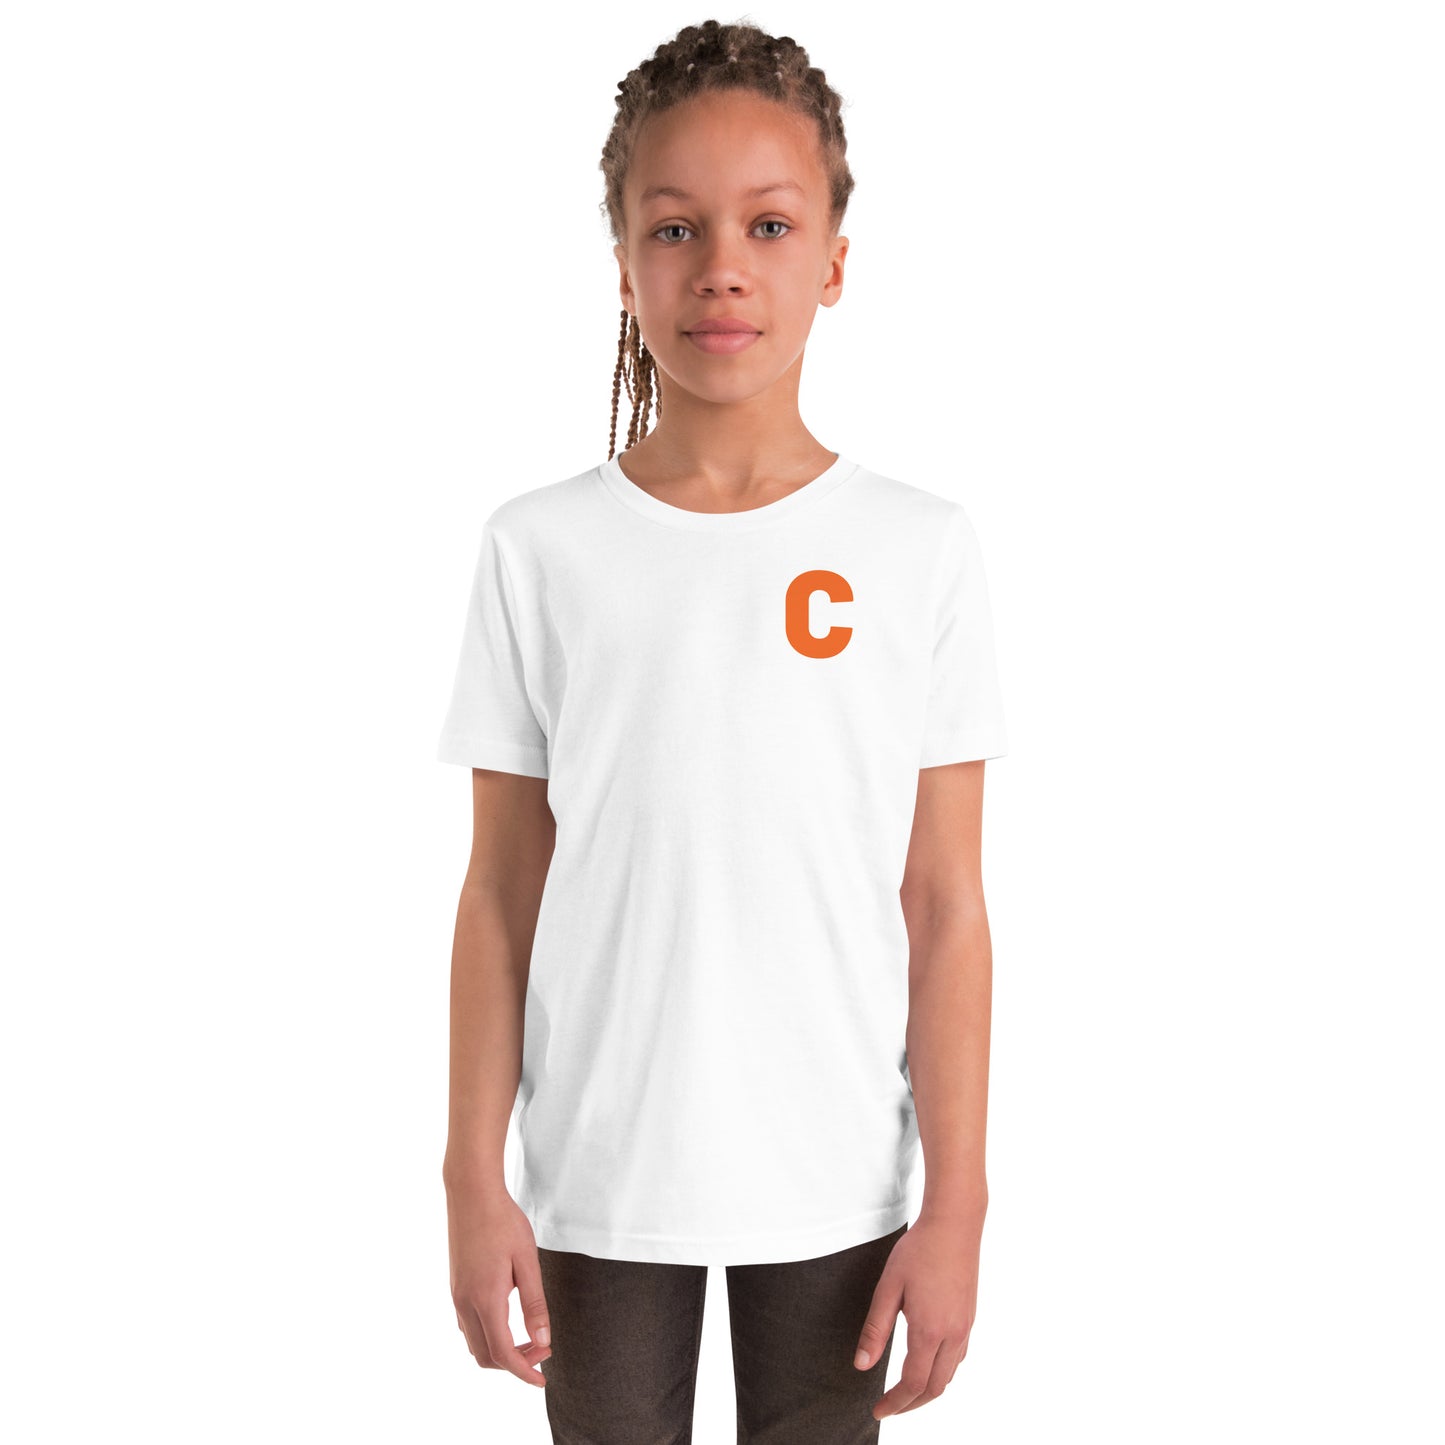 A Day at Shea "C" Youth Unisex T-Shirt